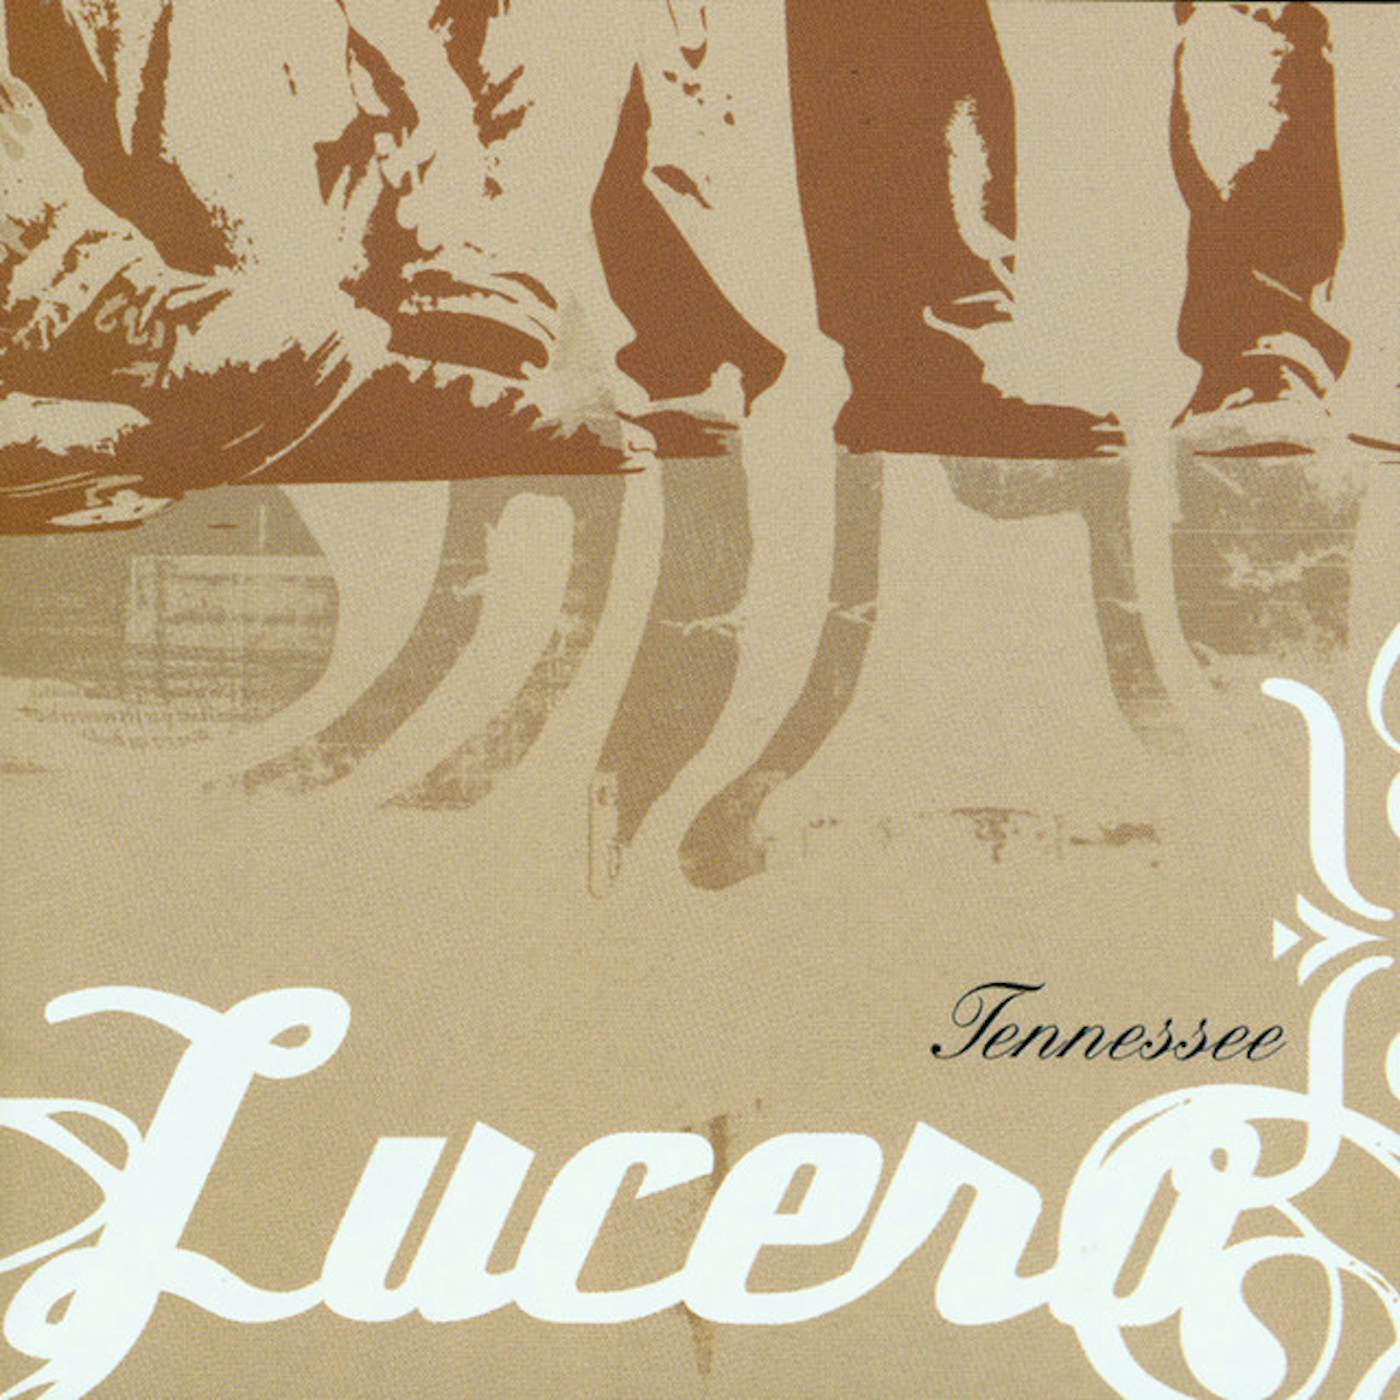 Lucero TENNESSEE: 20TH ANNIVERSARY EDITION - CLEAR Vinyl Record